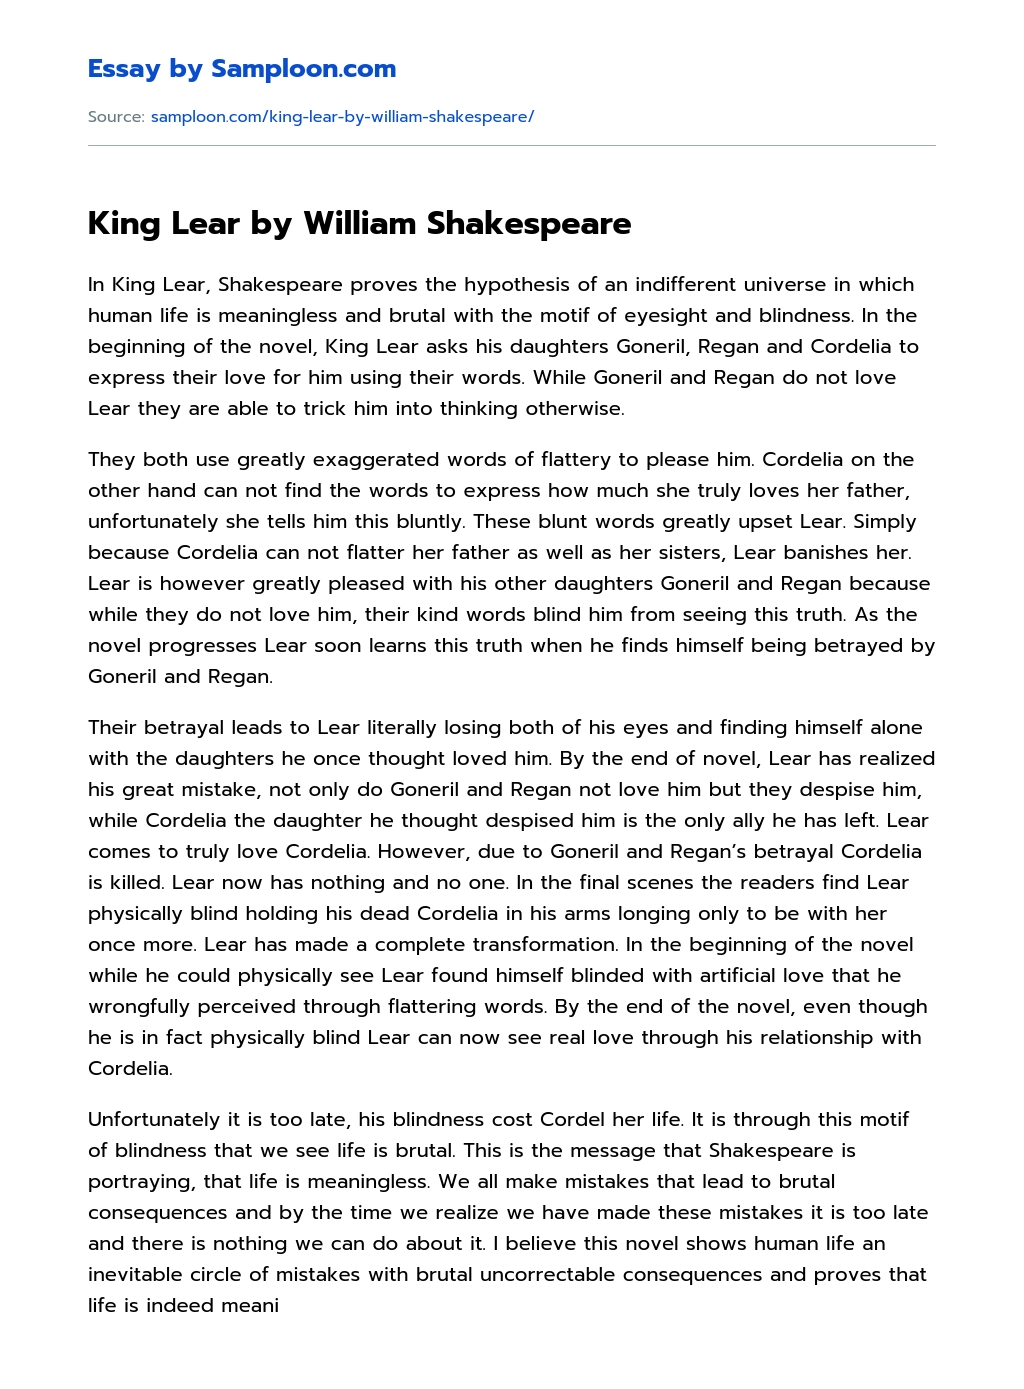 King Lear by William Shakespeare essay